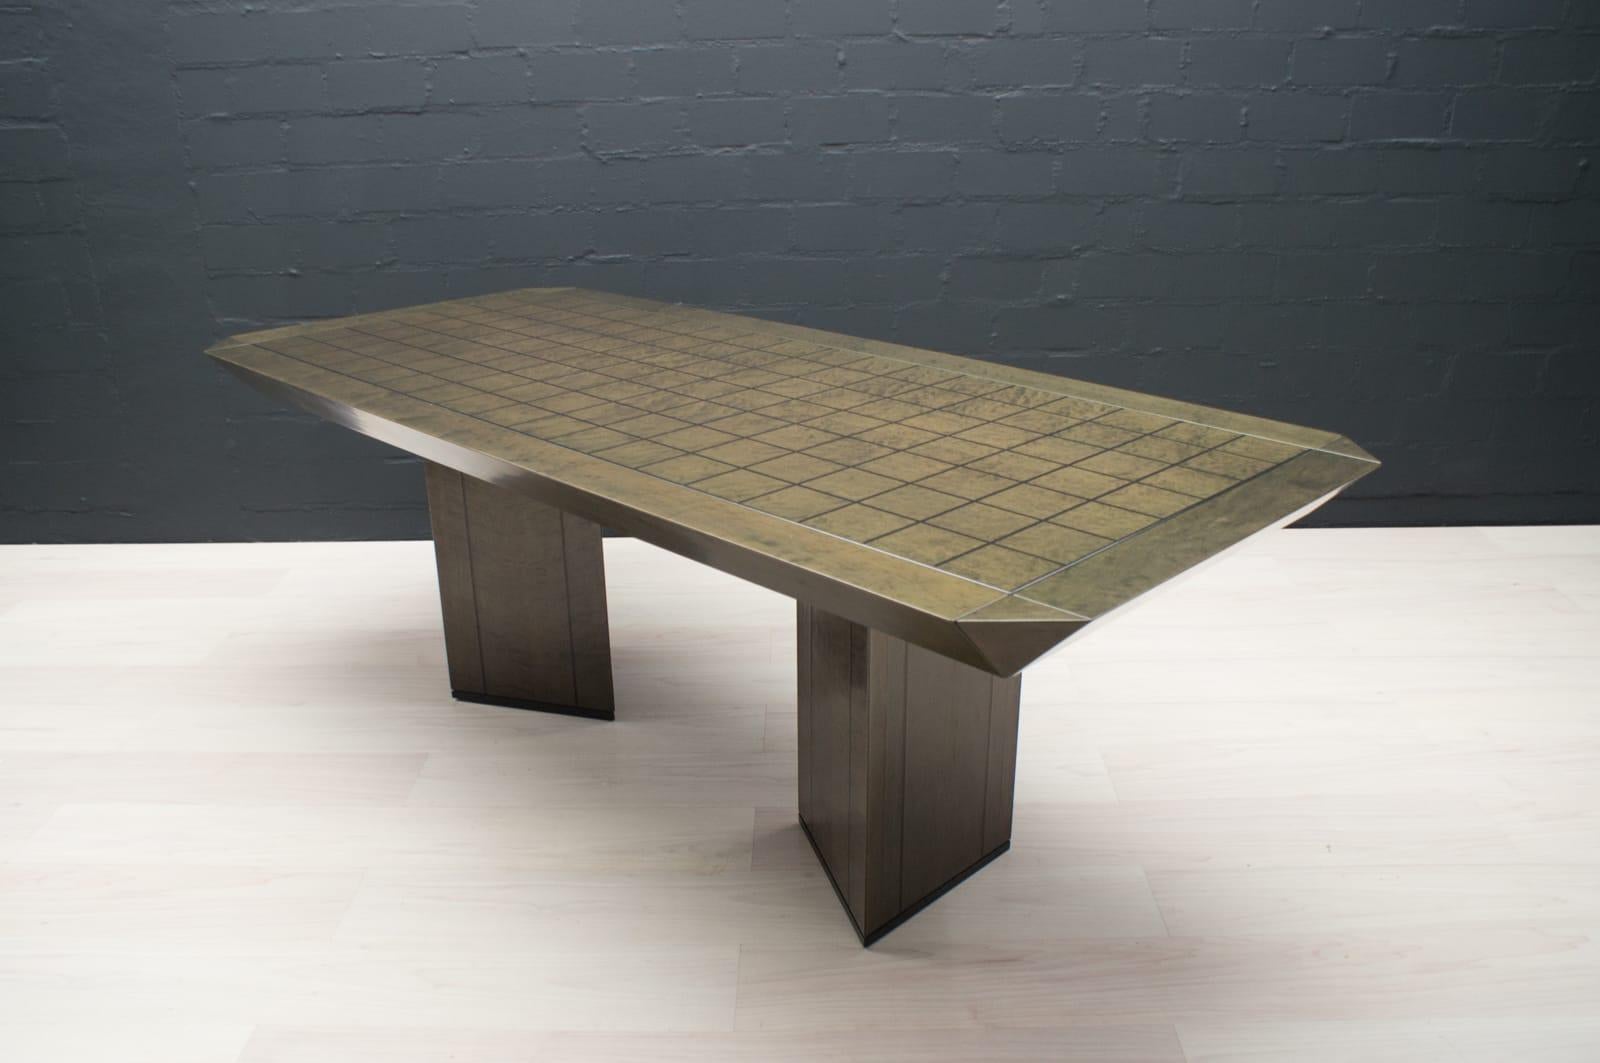 Stunning piece of Italian design, this large luxurious dining table.
It features a top in bird's-eye maple with a modern, grid pattern decoration. It's feet can be mounted in two ways and so they can also be disconnected from the top for shipping.